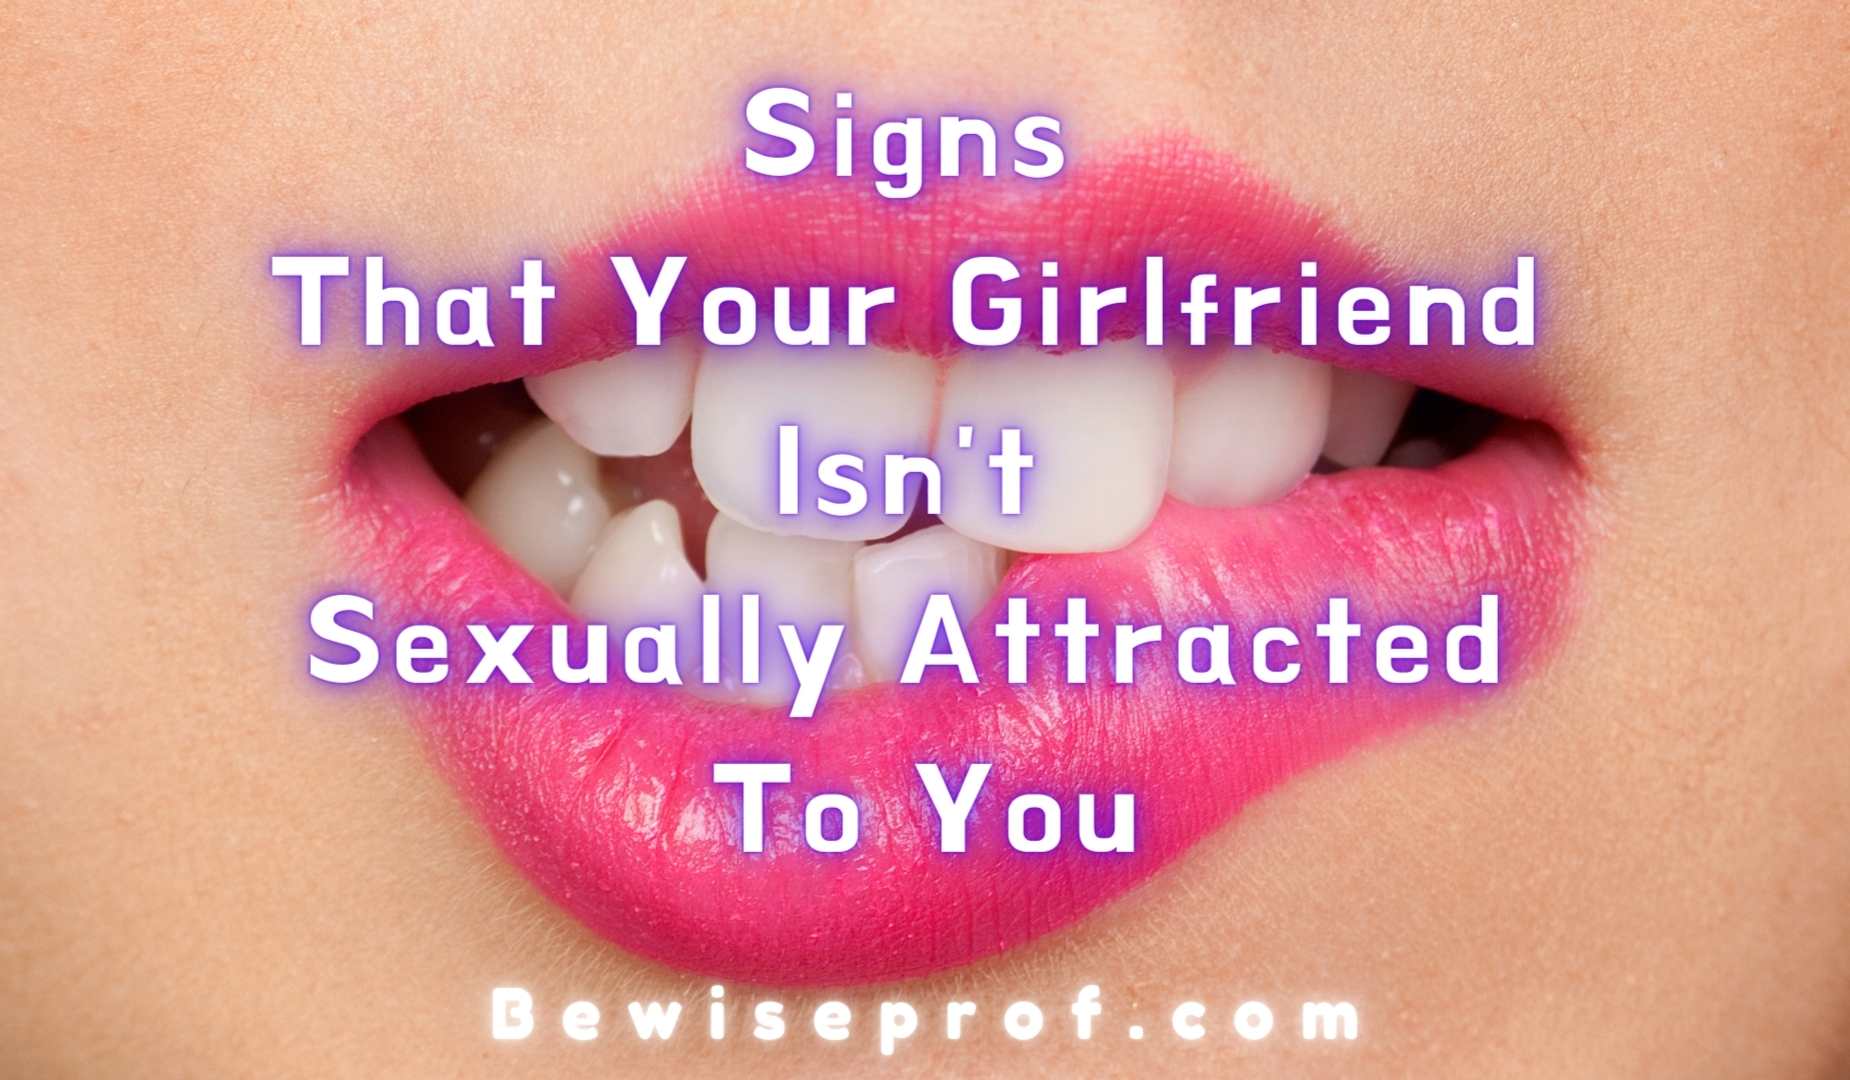 Signs That Your Girlfriend Isn't Sexually Attracted To You